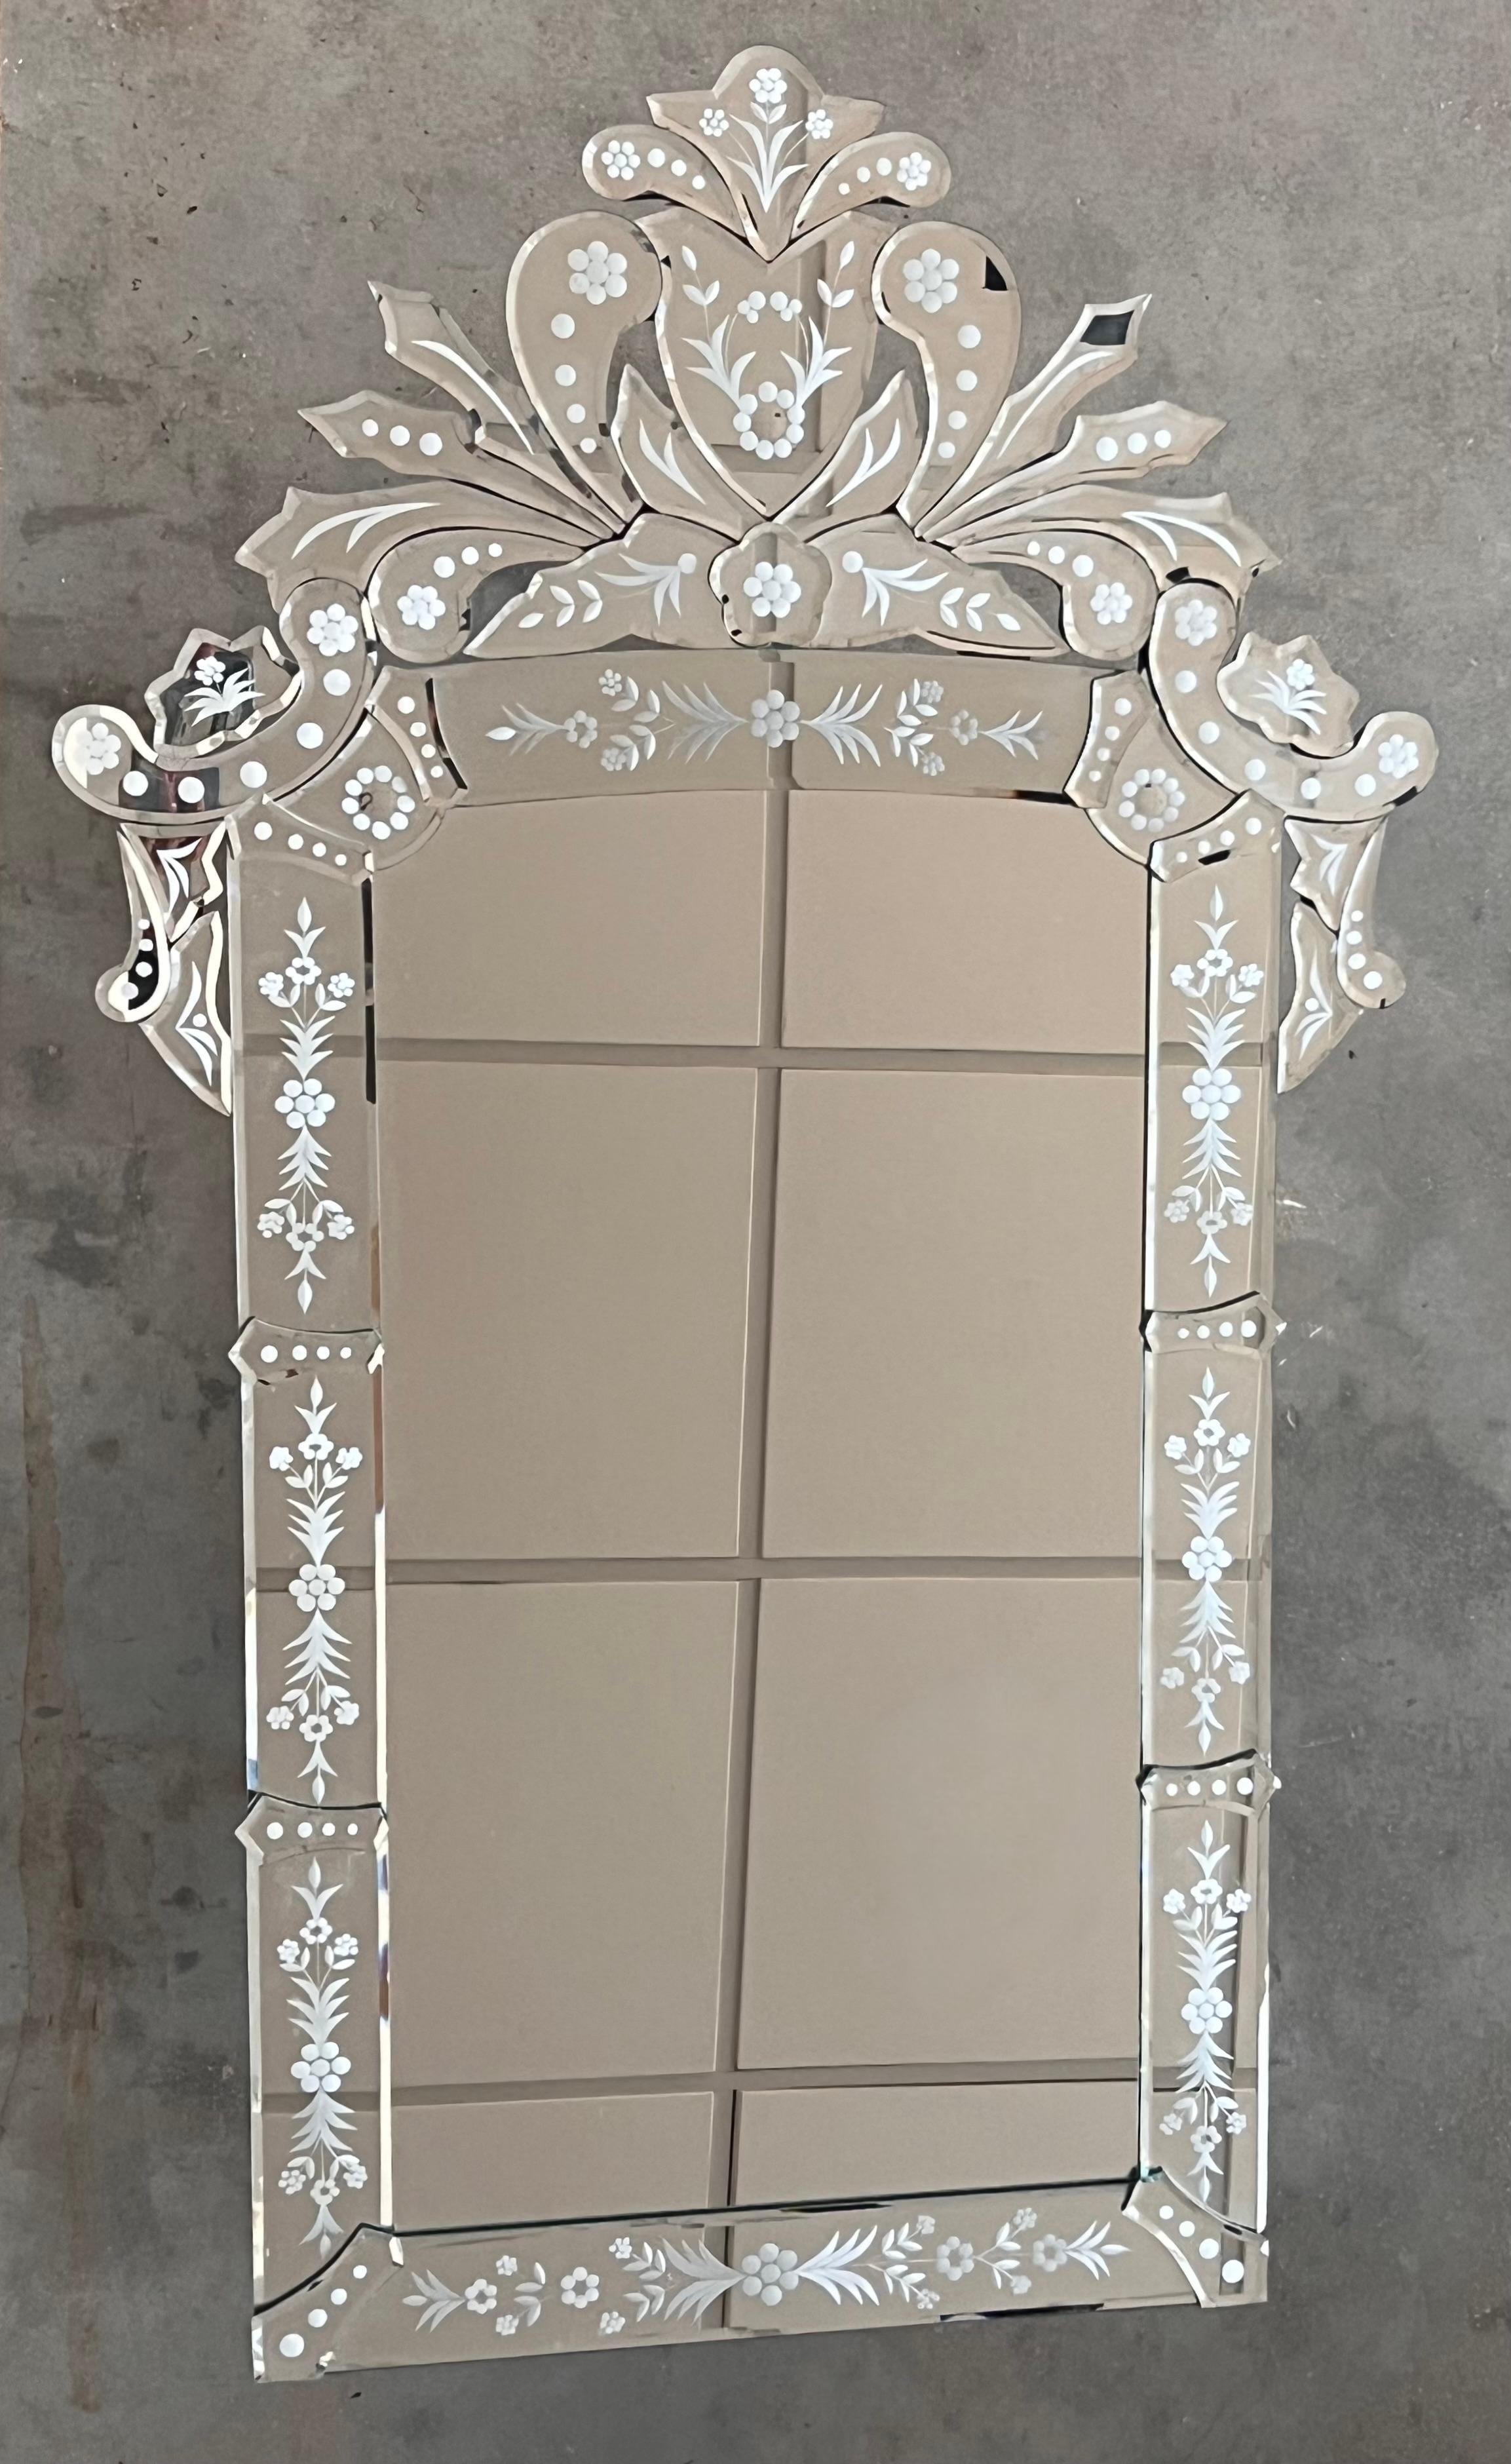 Venetian glass mirror with shaped and engraved border mirror glass surmounted by engraved mirrored naturalistic crests.